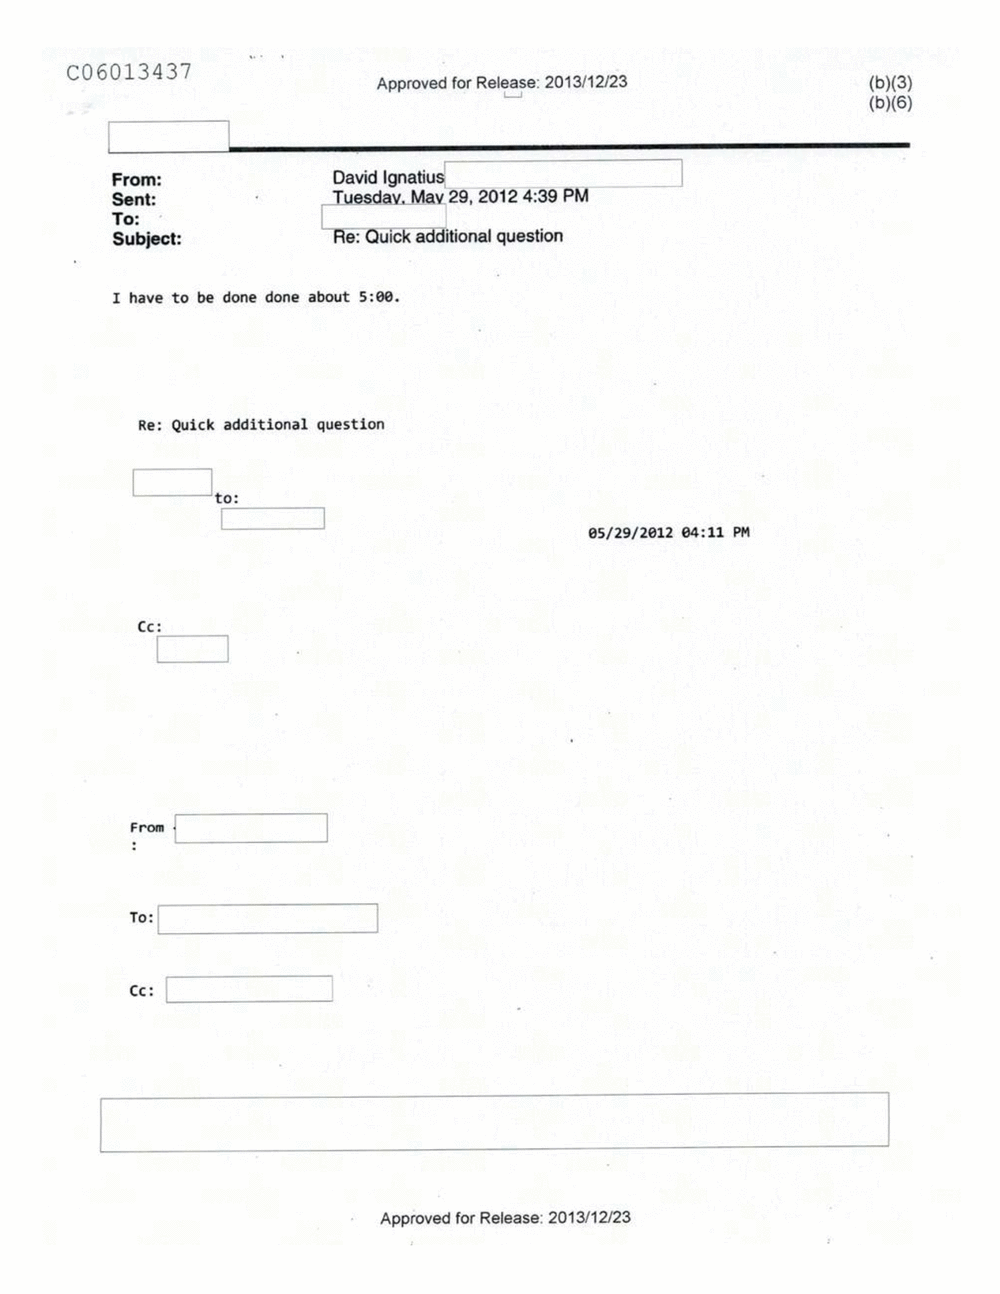 Page 300 from Email Correspondence Between Reporters and CIA Flacks